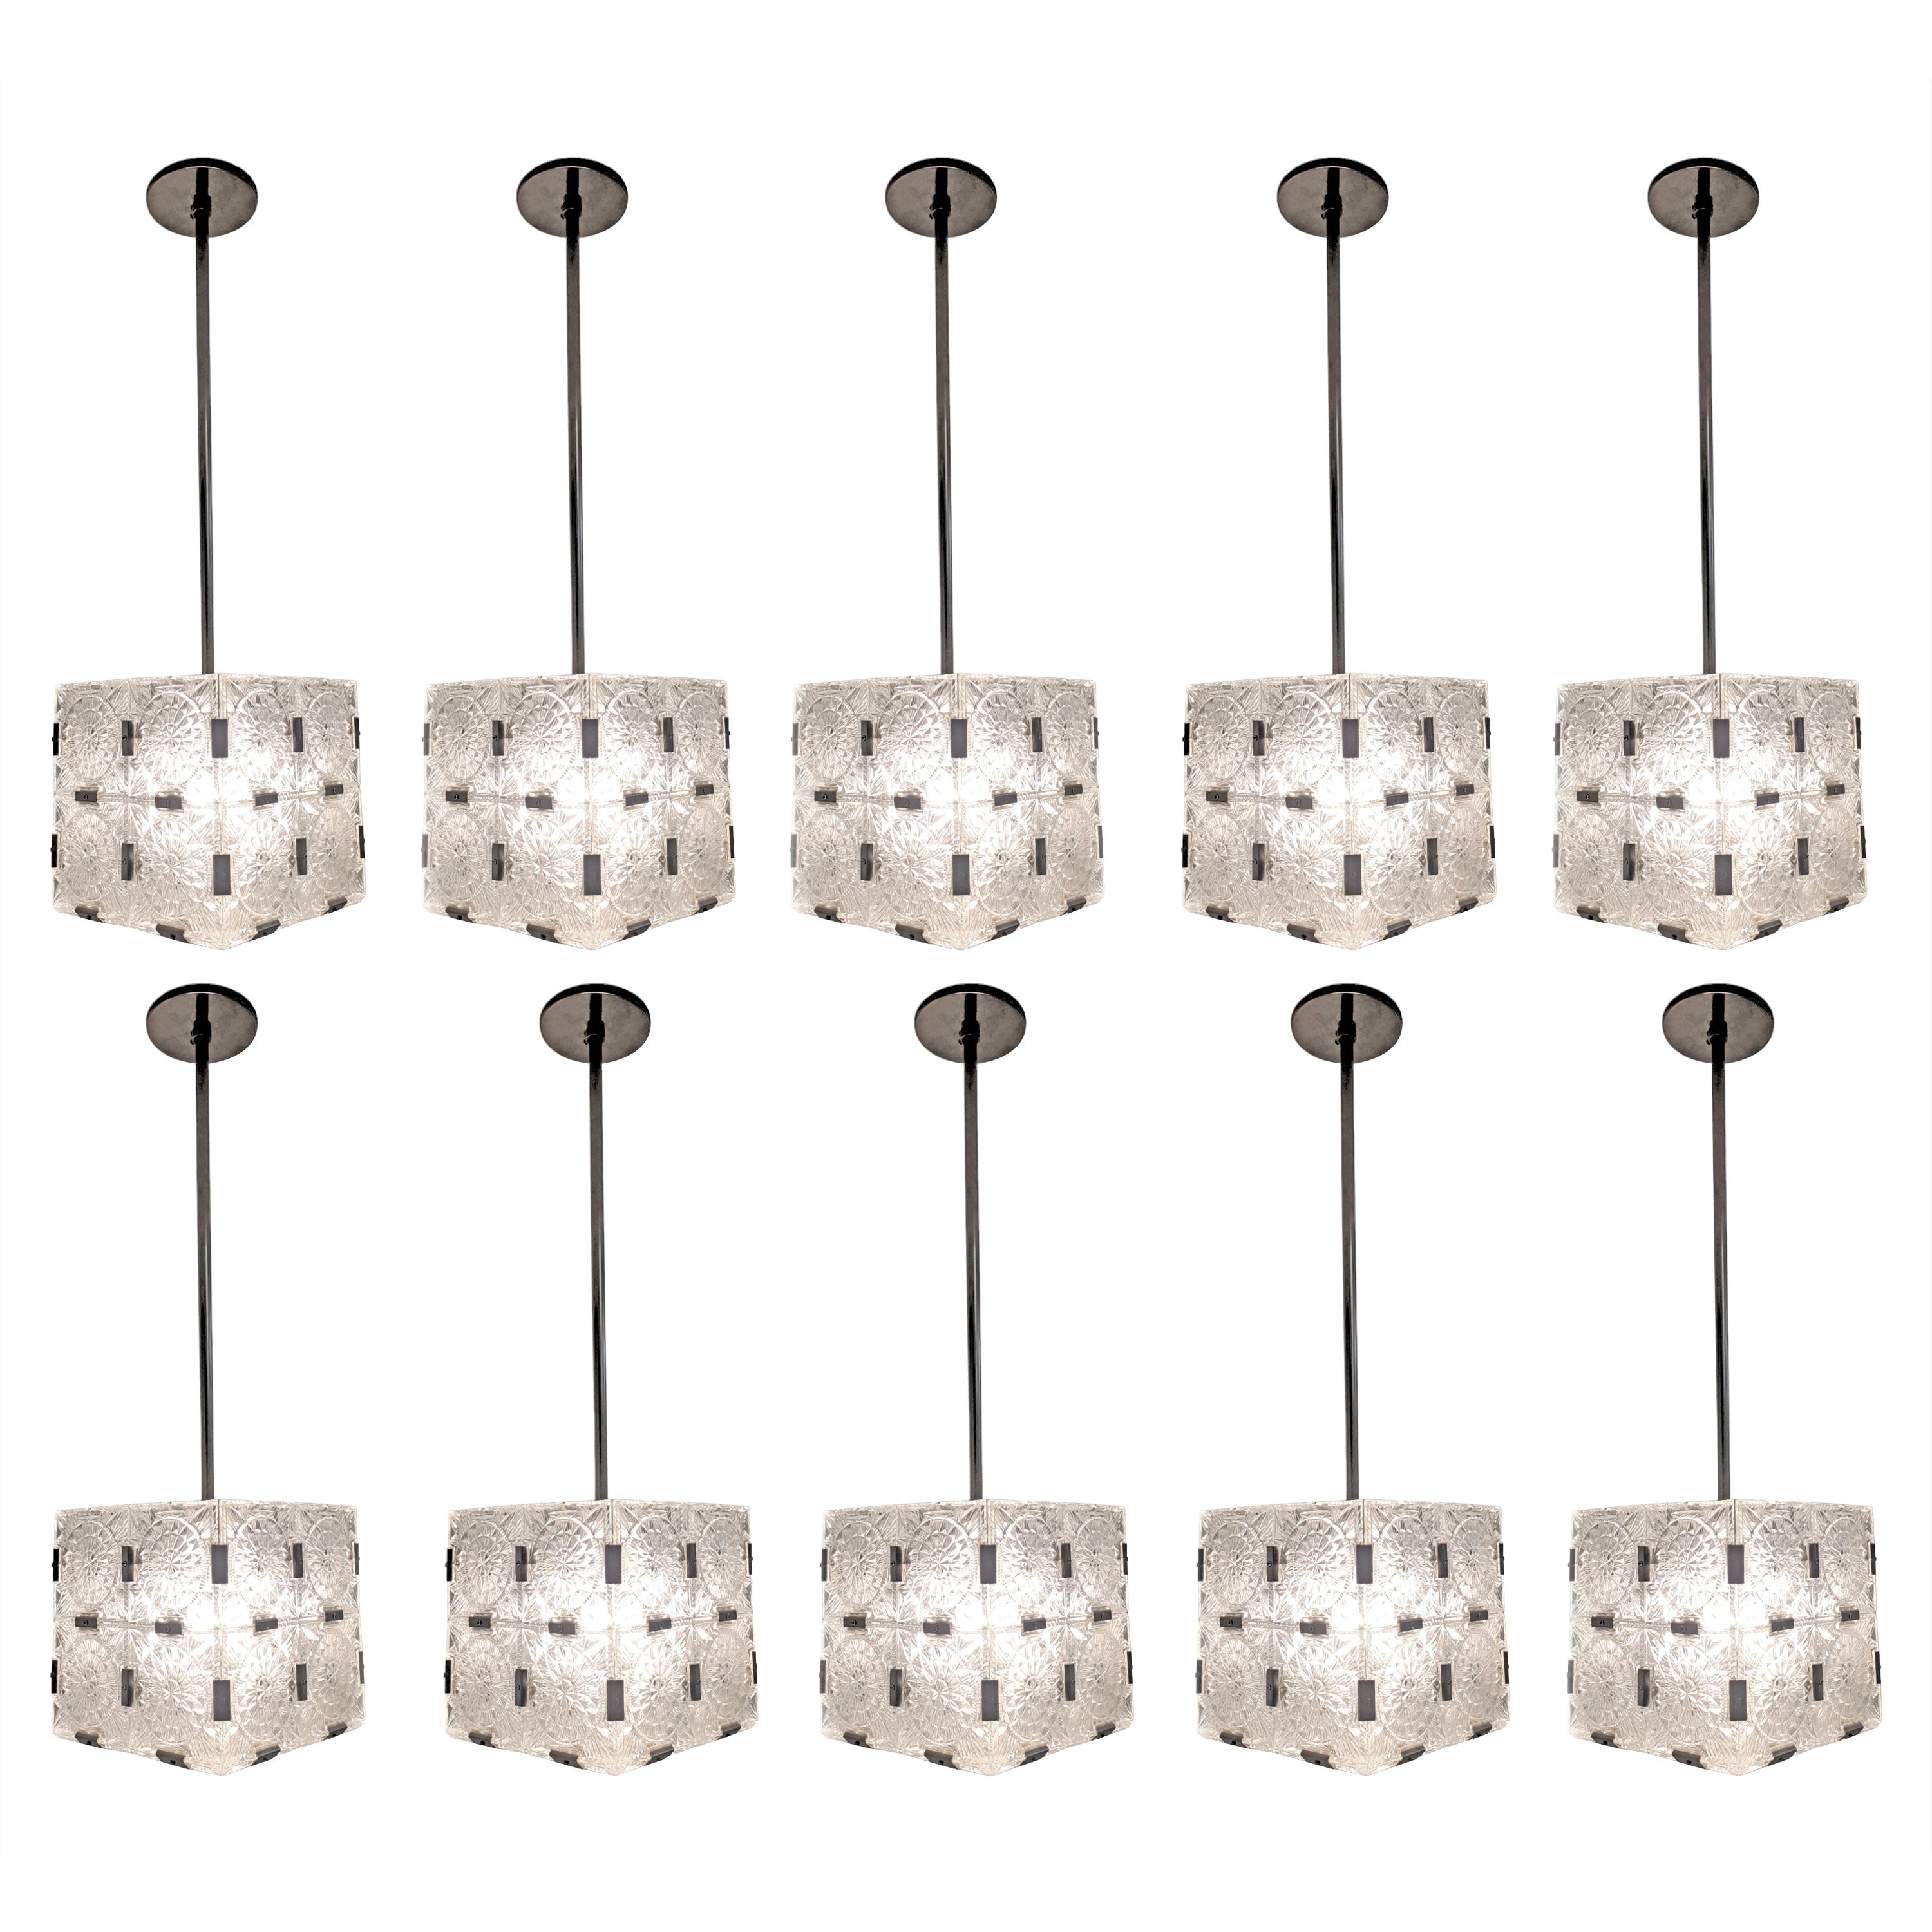 Set of Ten Original Box Cube Pendant Lights, Glass with Nickeled Clips